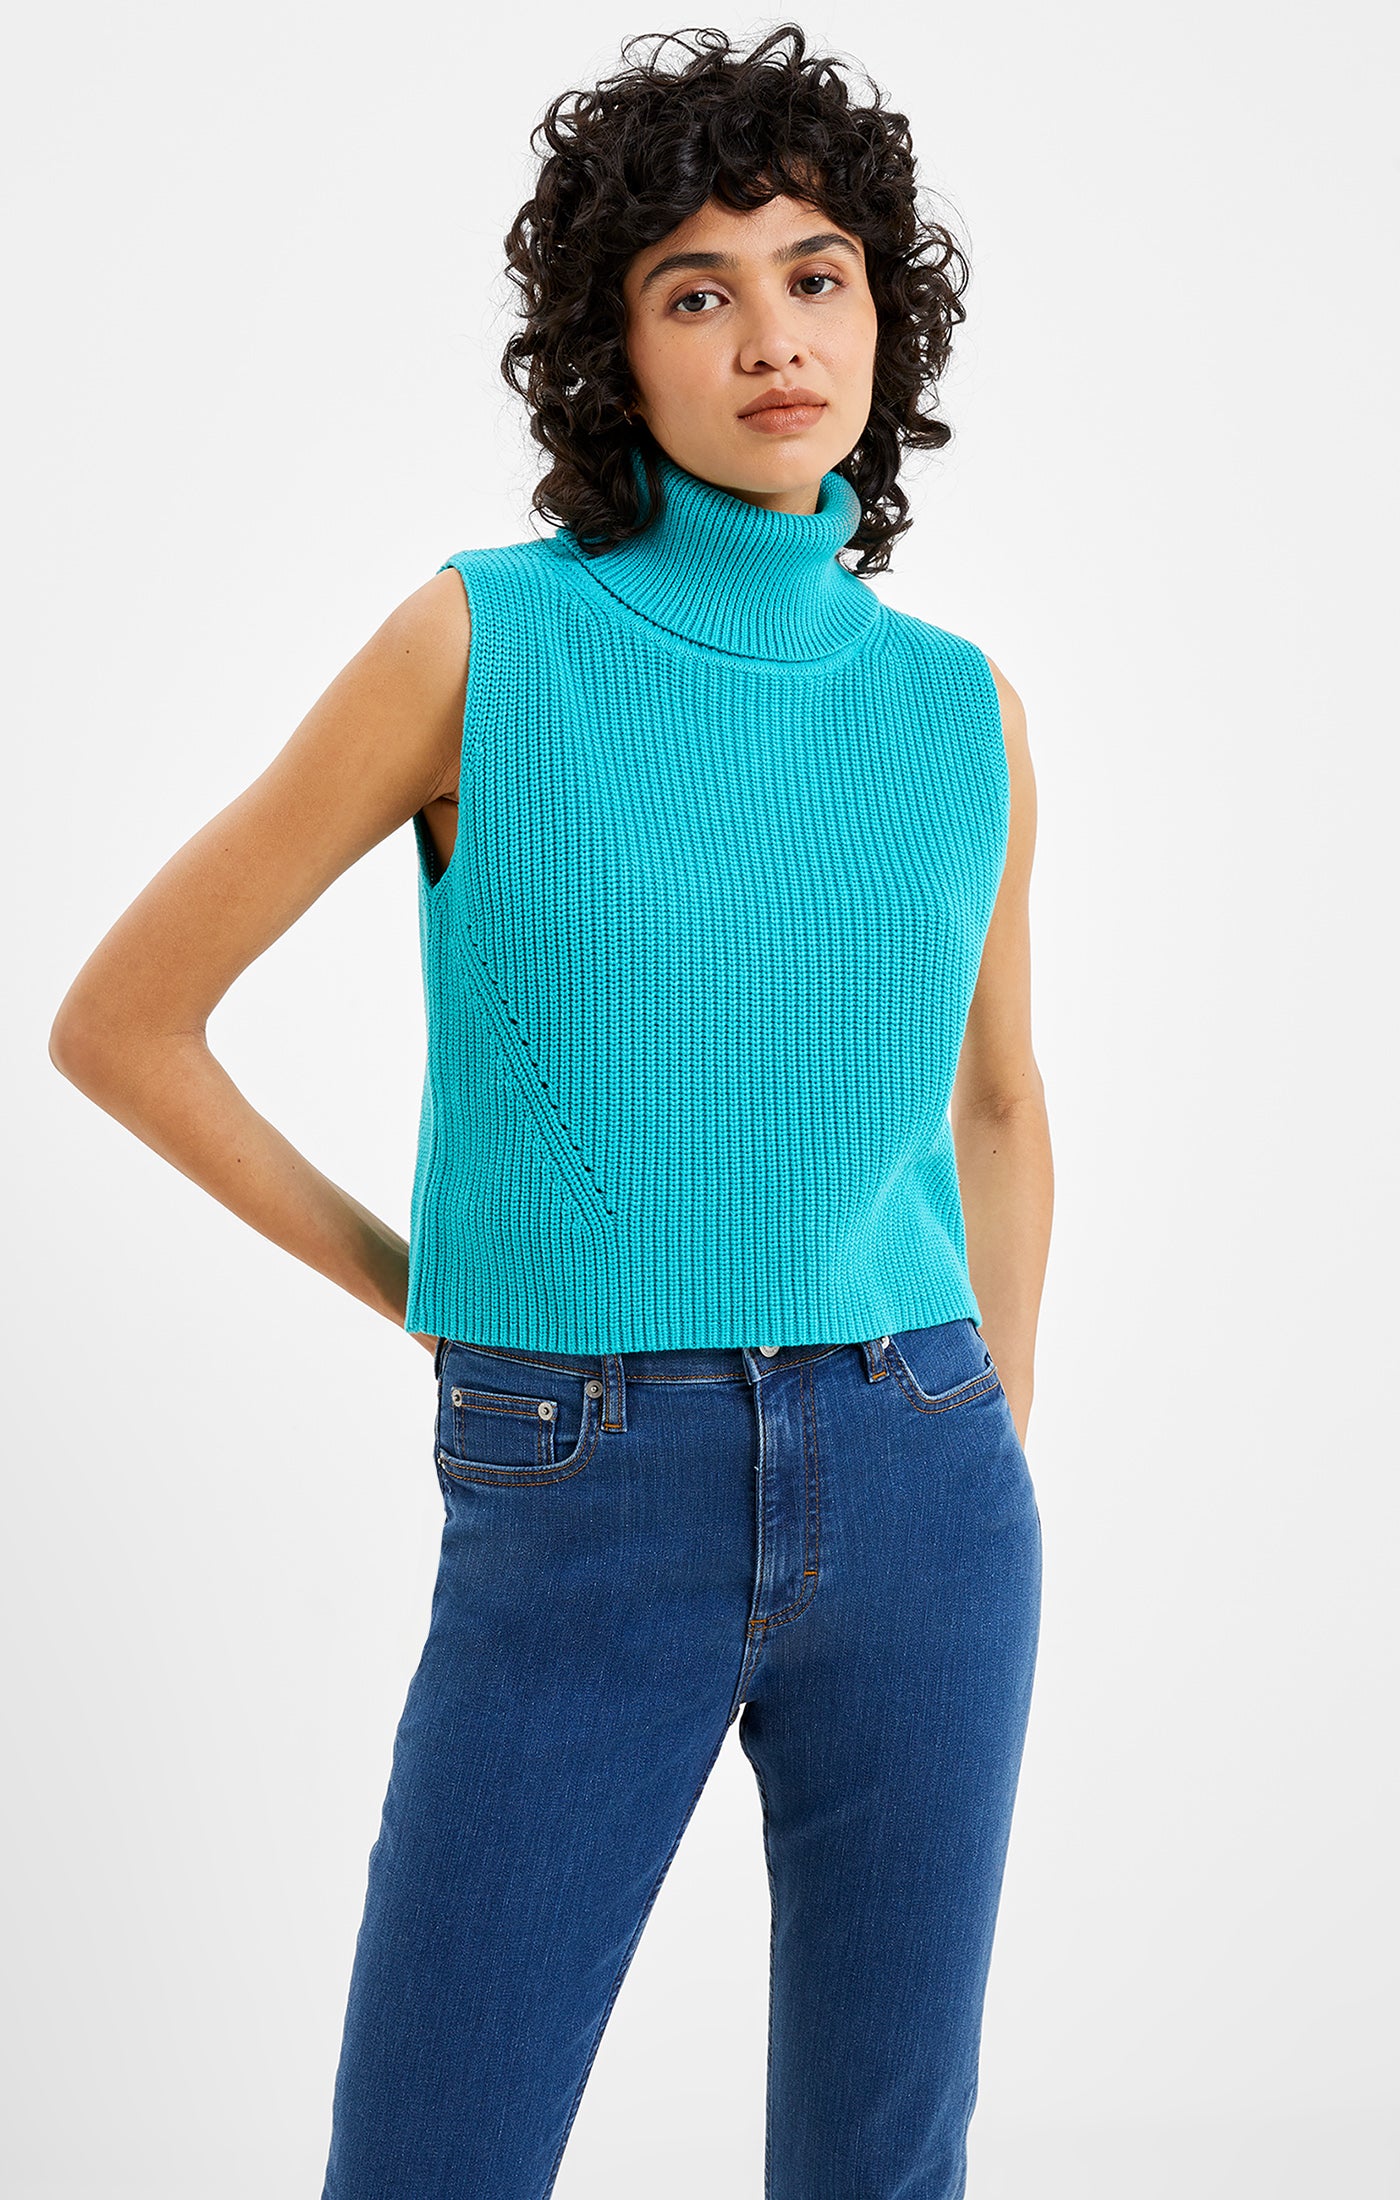 Mozart Cropped Sleeveless Jumper in Jaded Teal